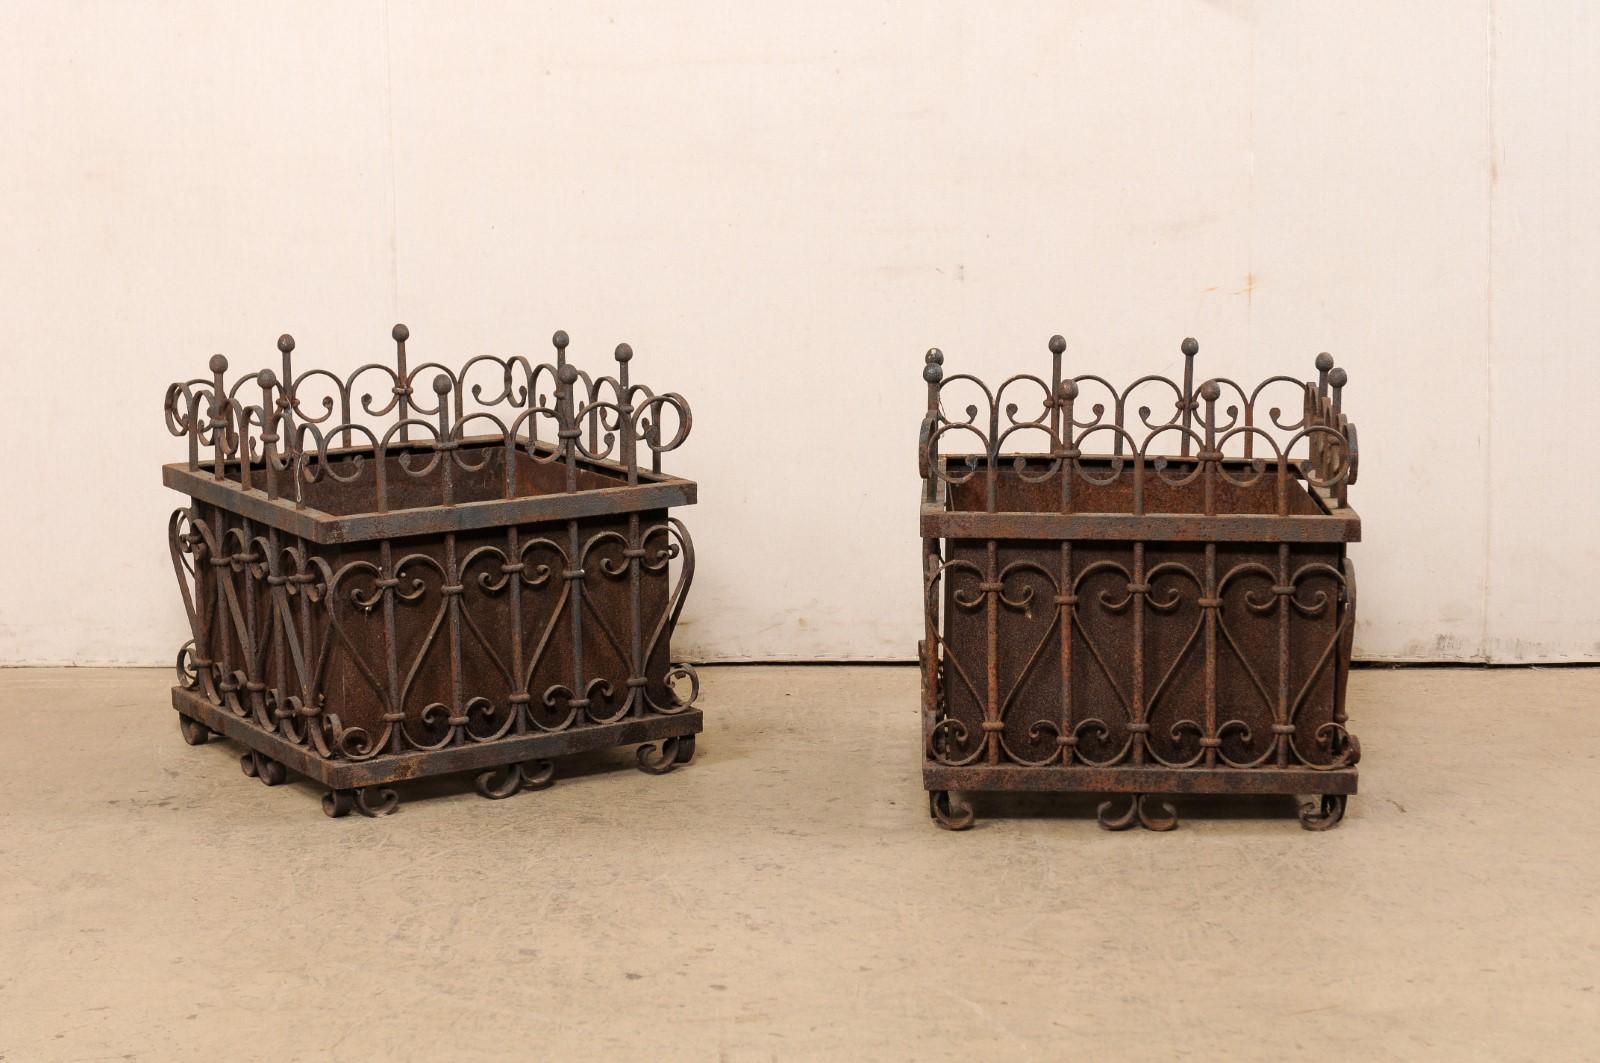 A French pair of wrought iron garden planters from the early 20th century. This antique pair of planters from France, each approximately two feet square in shape, feature scrolled ornamental wrought iron work, with petite ball-shaped finials,